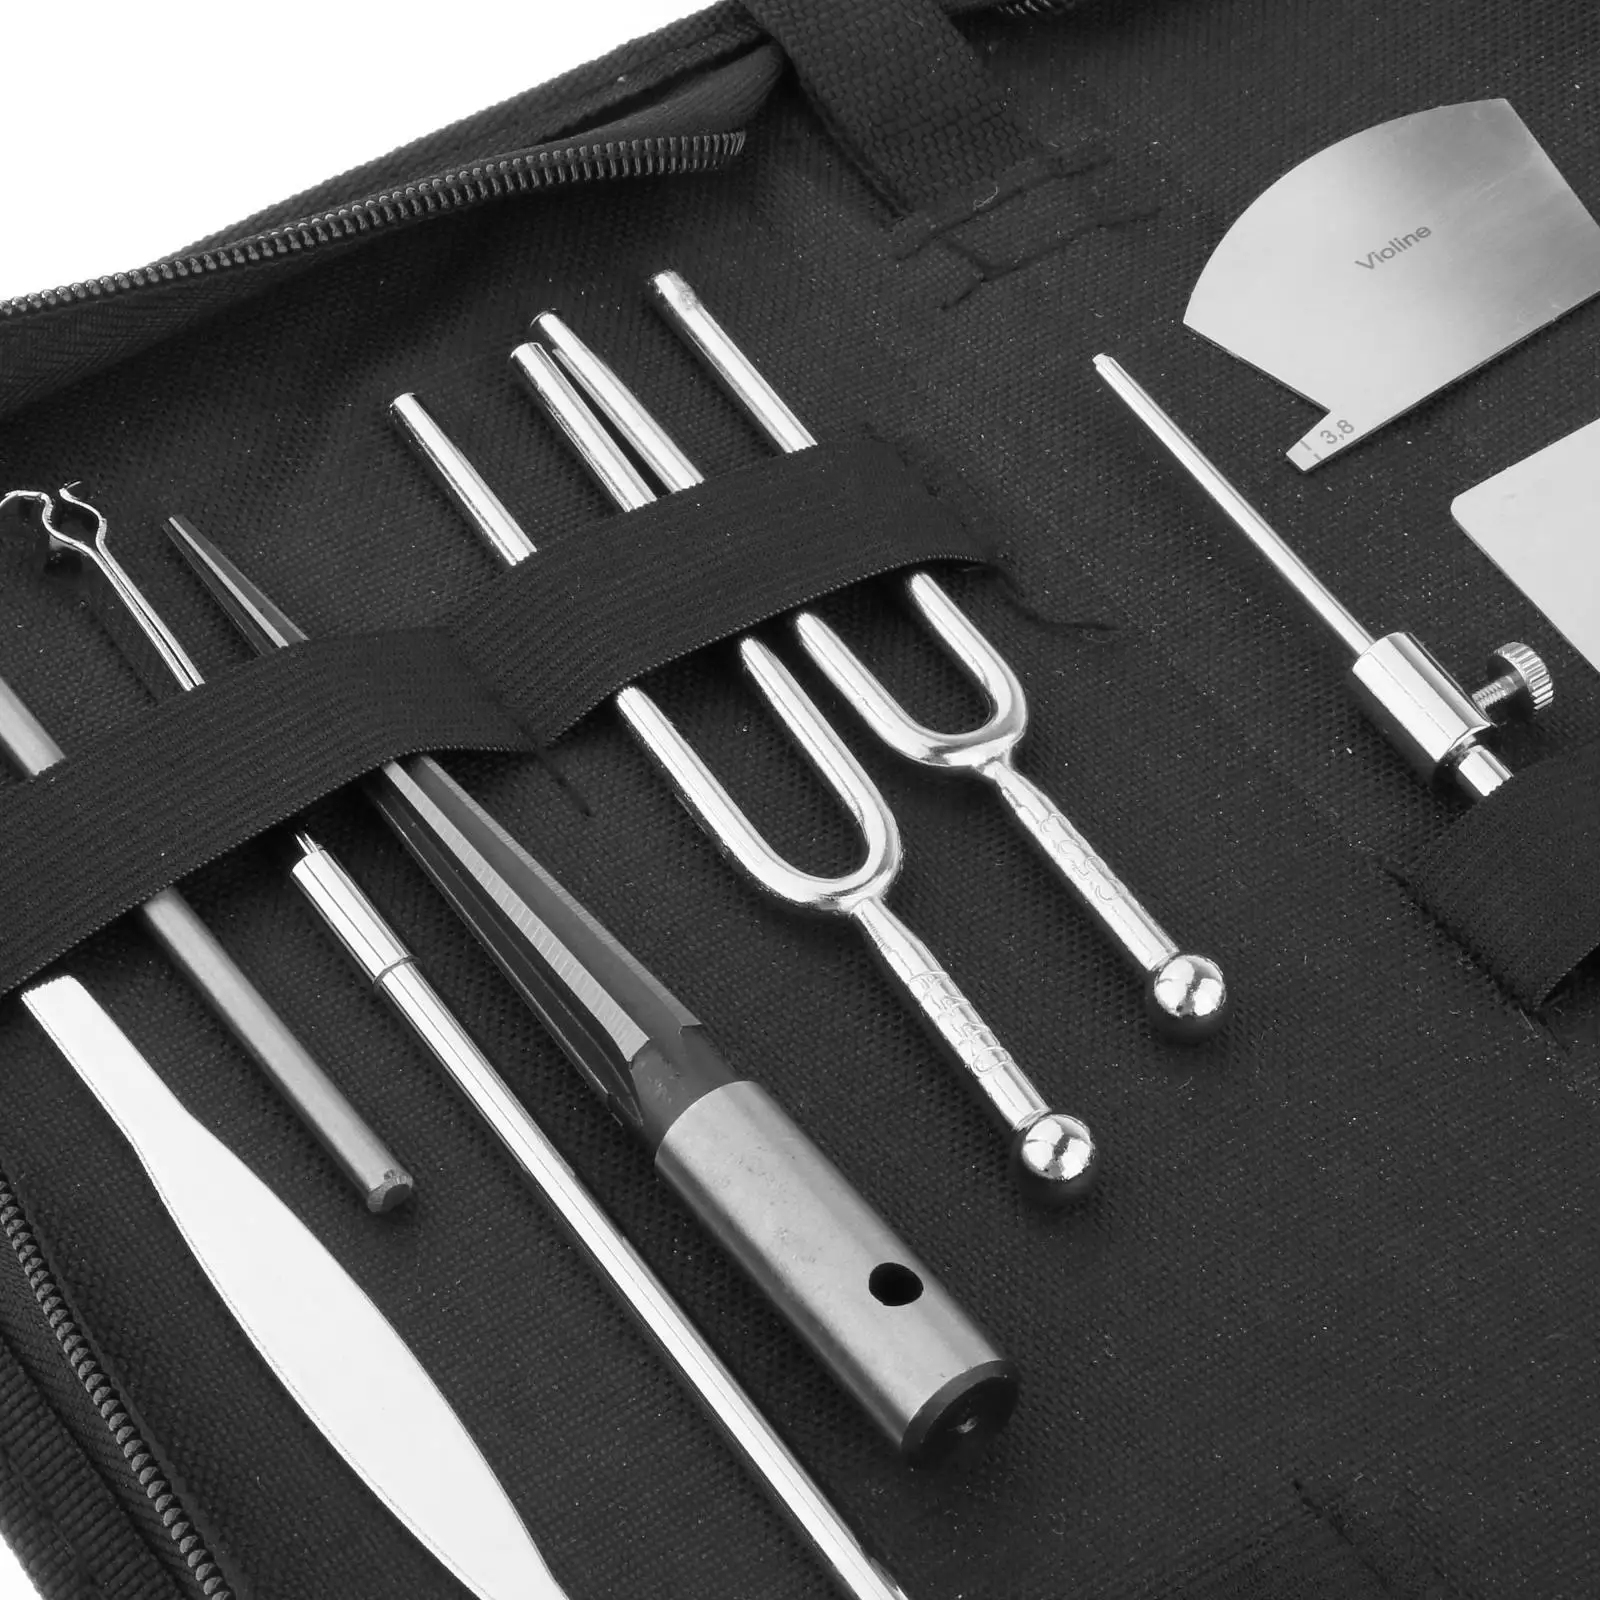 Violin Repairing Tools Set with Carrying Case Violin Making Retriever Clip Tuning Fork Viola Accessory Edge Clamps Luthier Tool